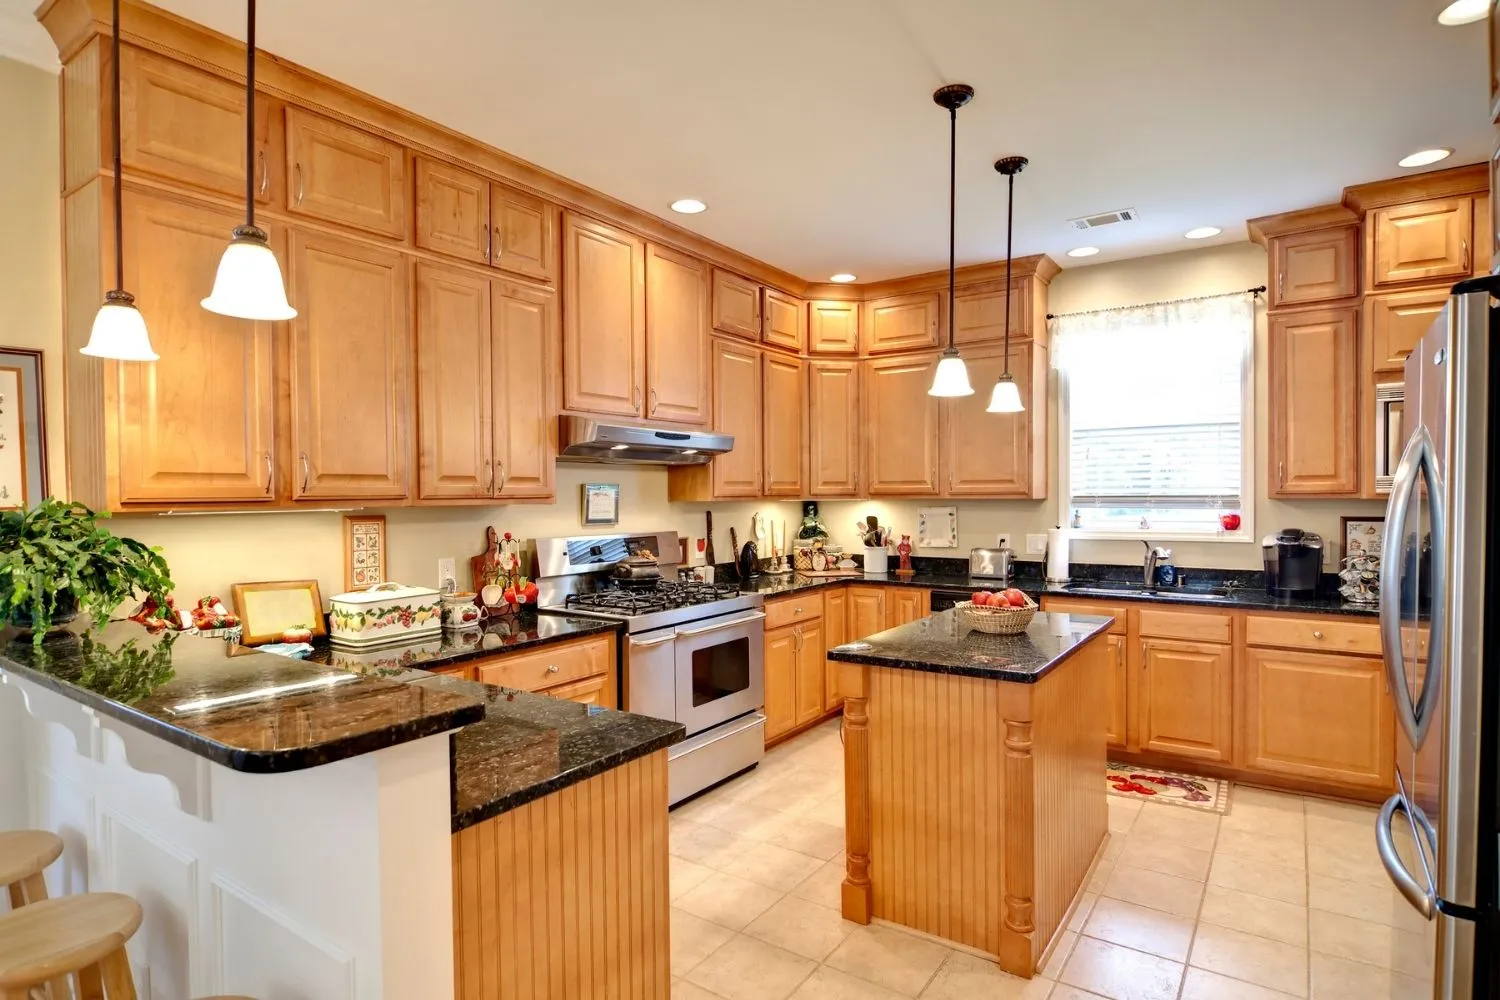 Price To Reface Kitchen Cabinets